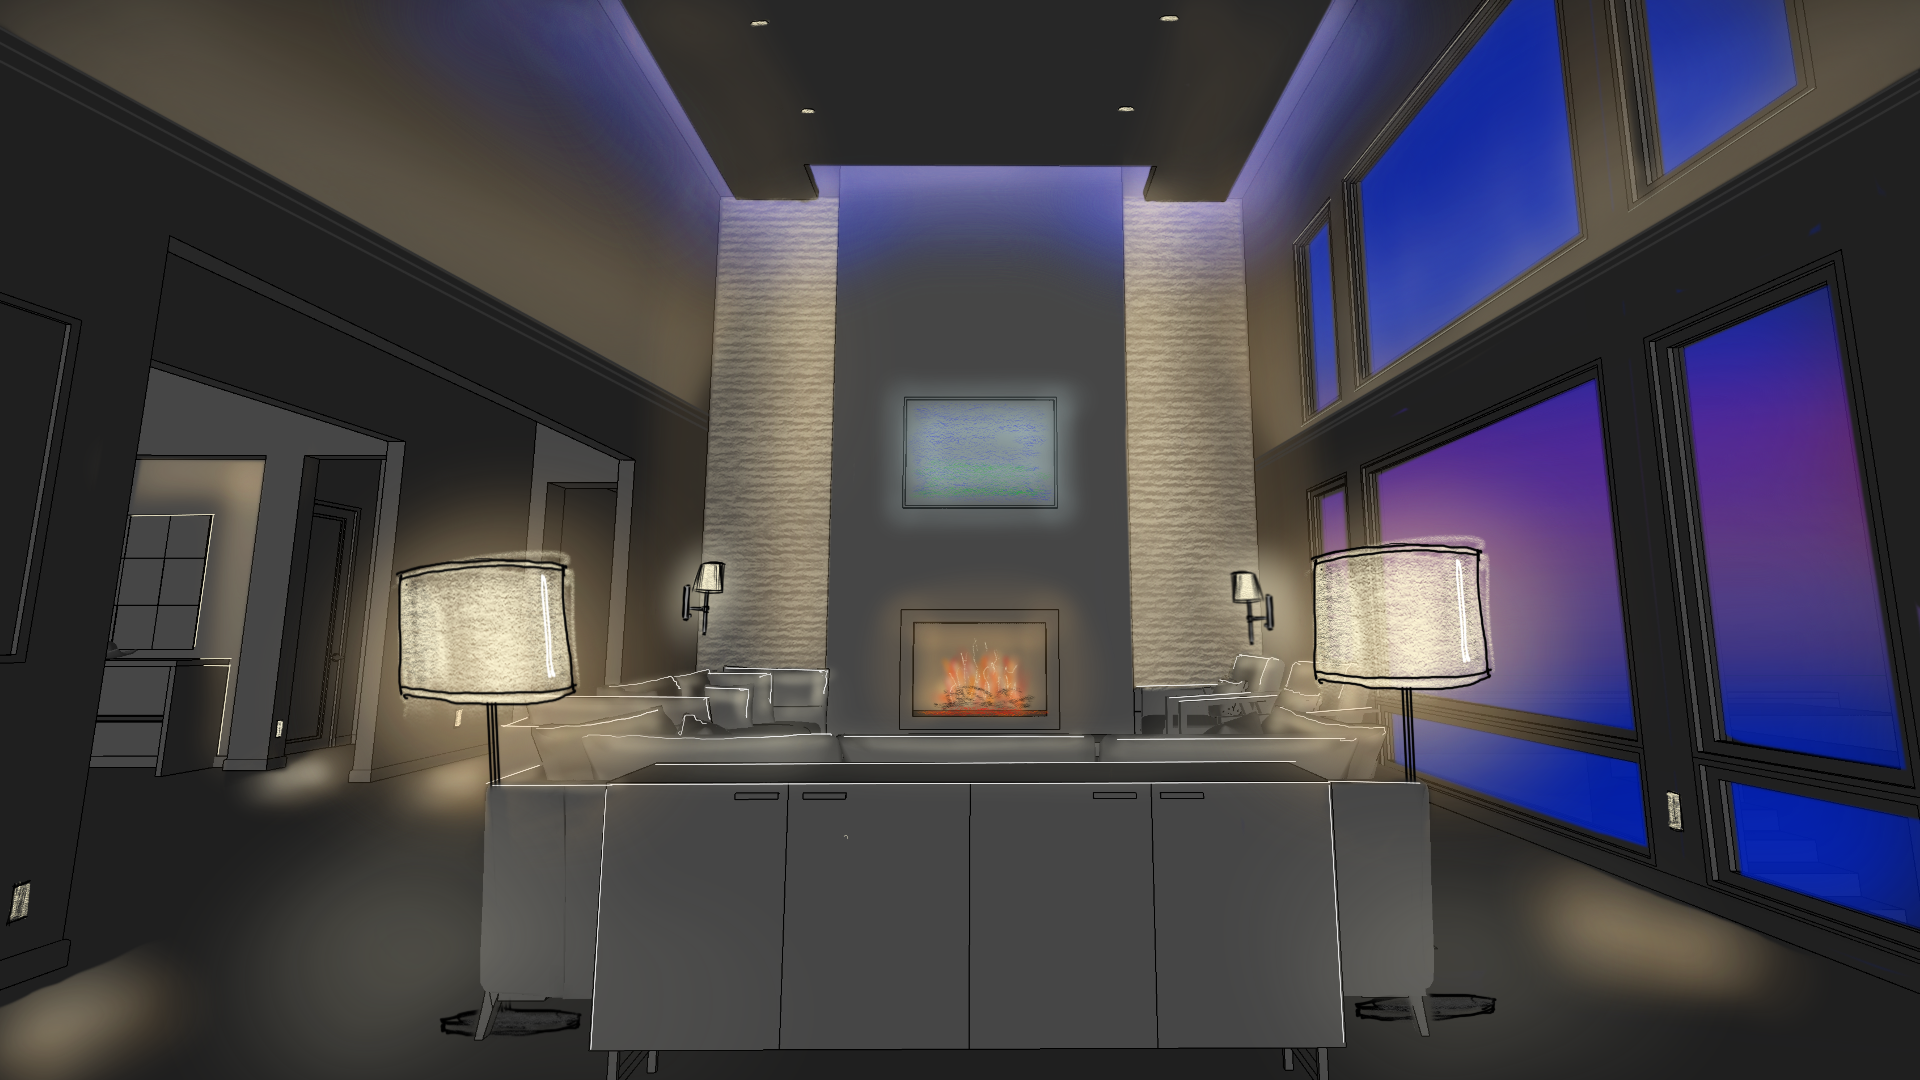 A rendering of a living room with an emphasis on the lighting design